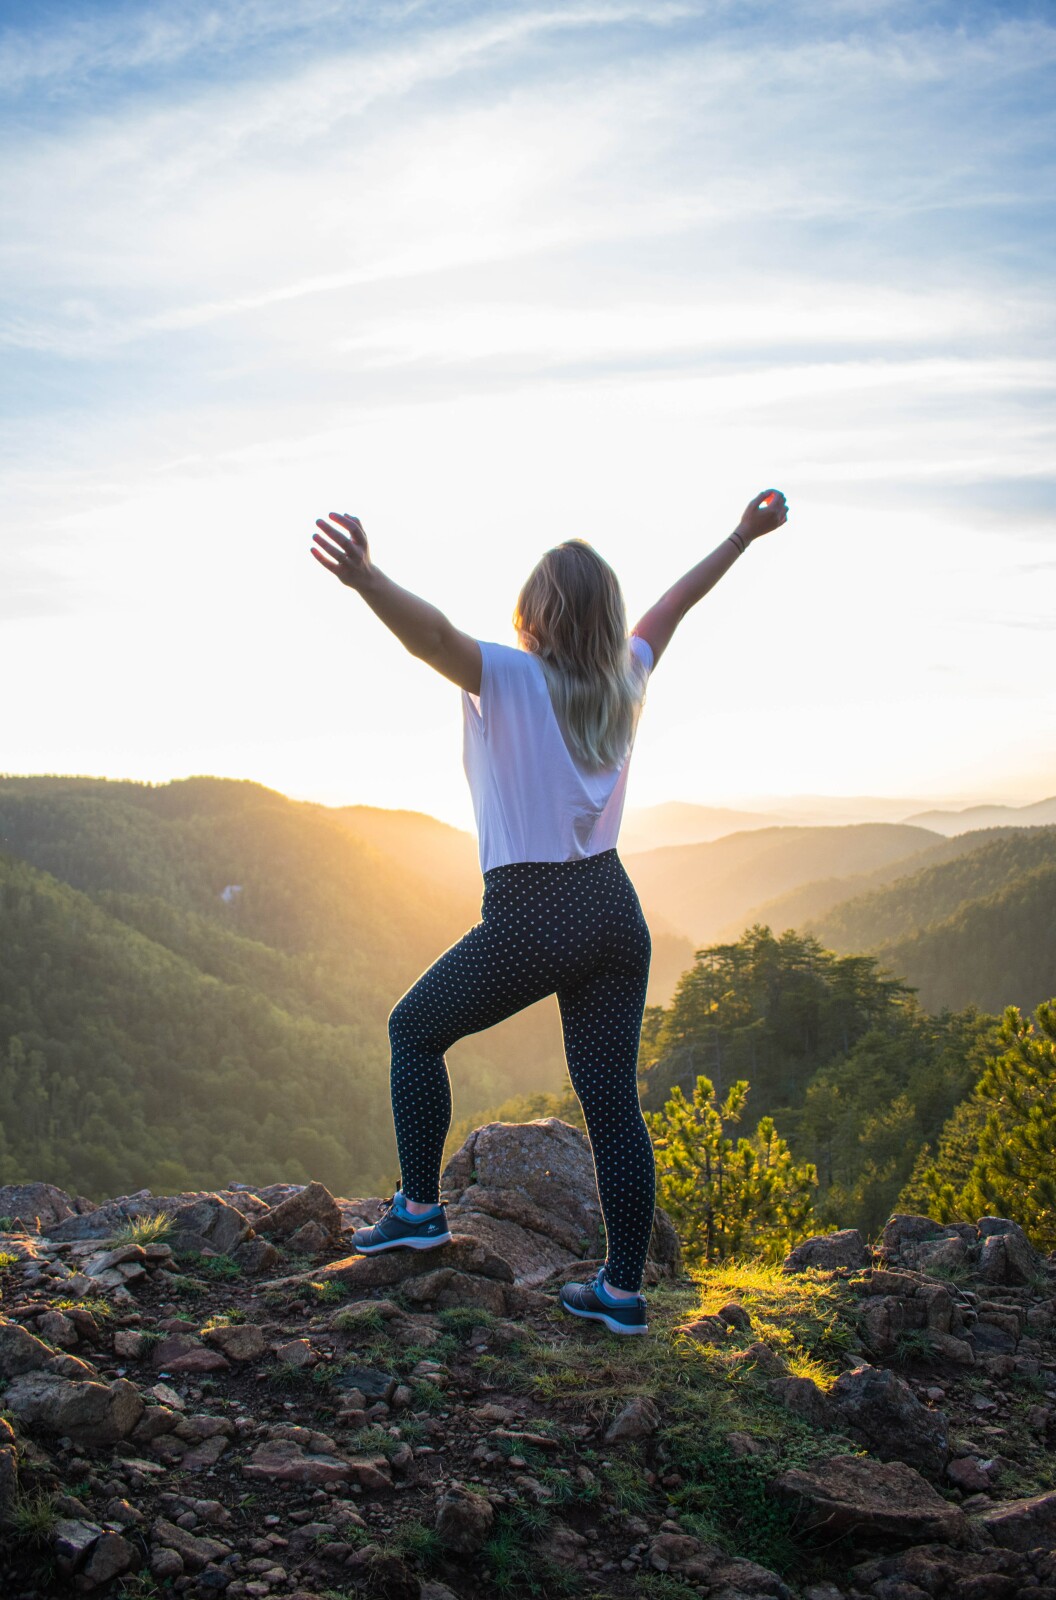 5 Key Areas to Increase Wellness In Your Life To Live More Abundantly